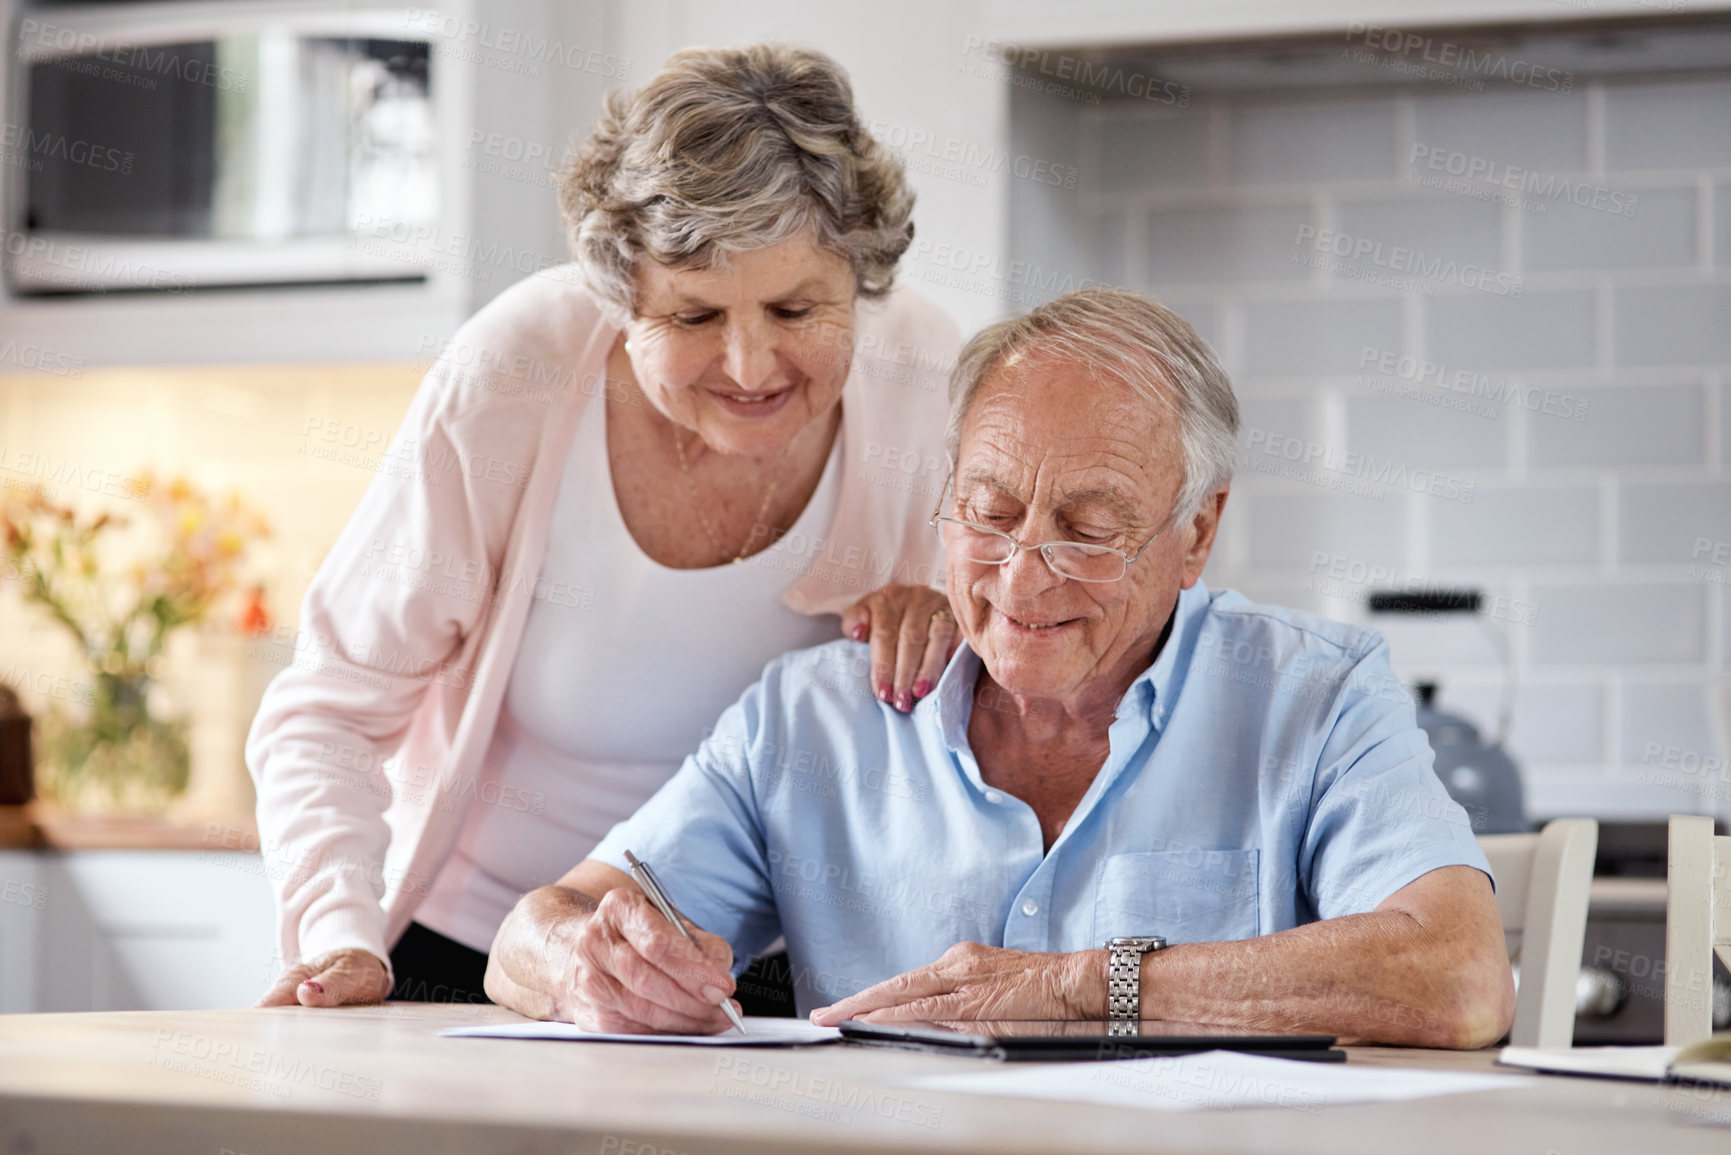 Buy stock photo Shot of an elderly couple going over paperwork at home